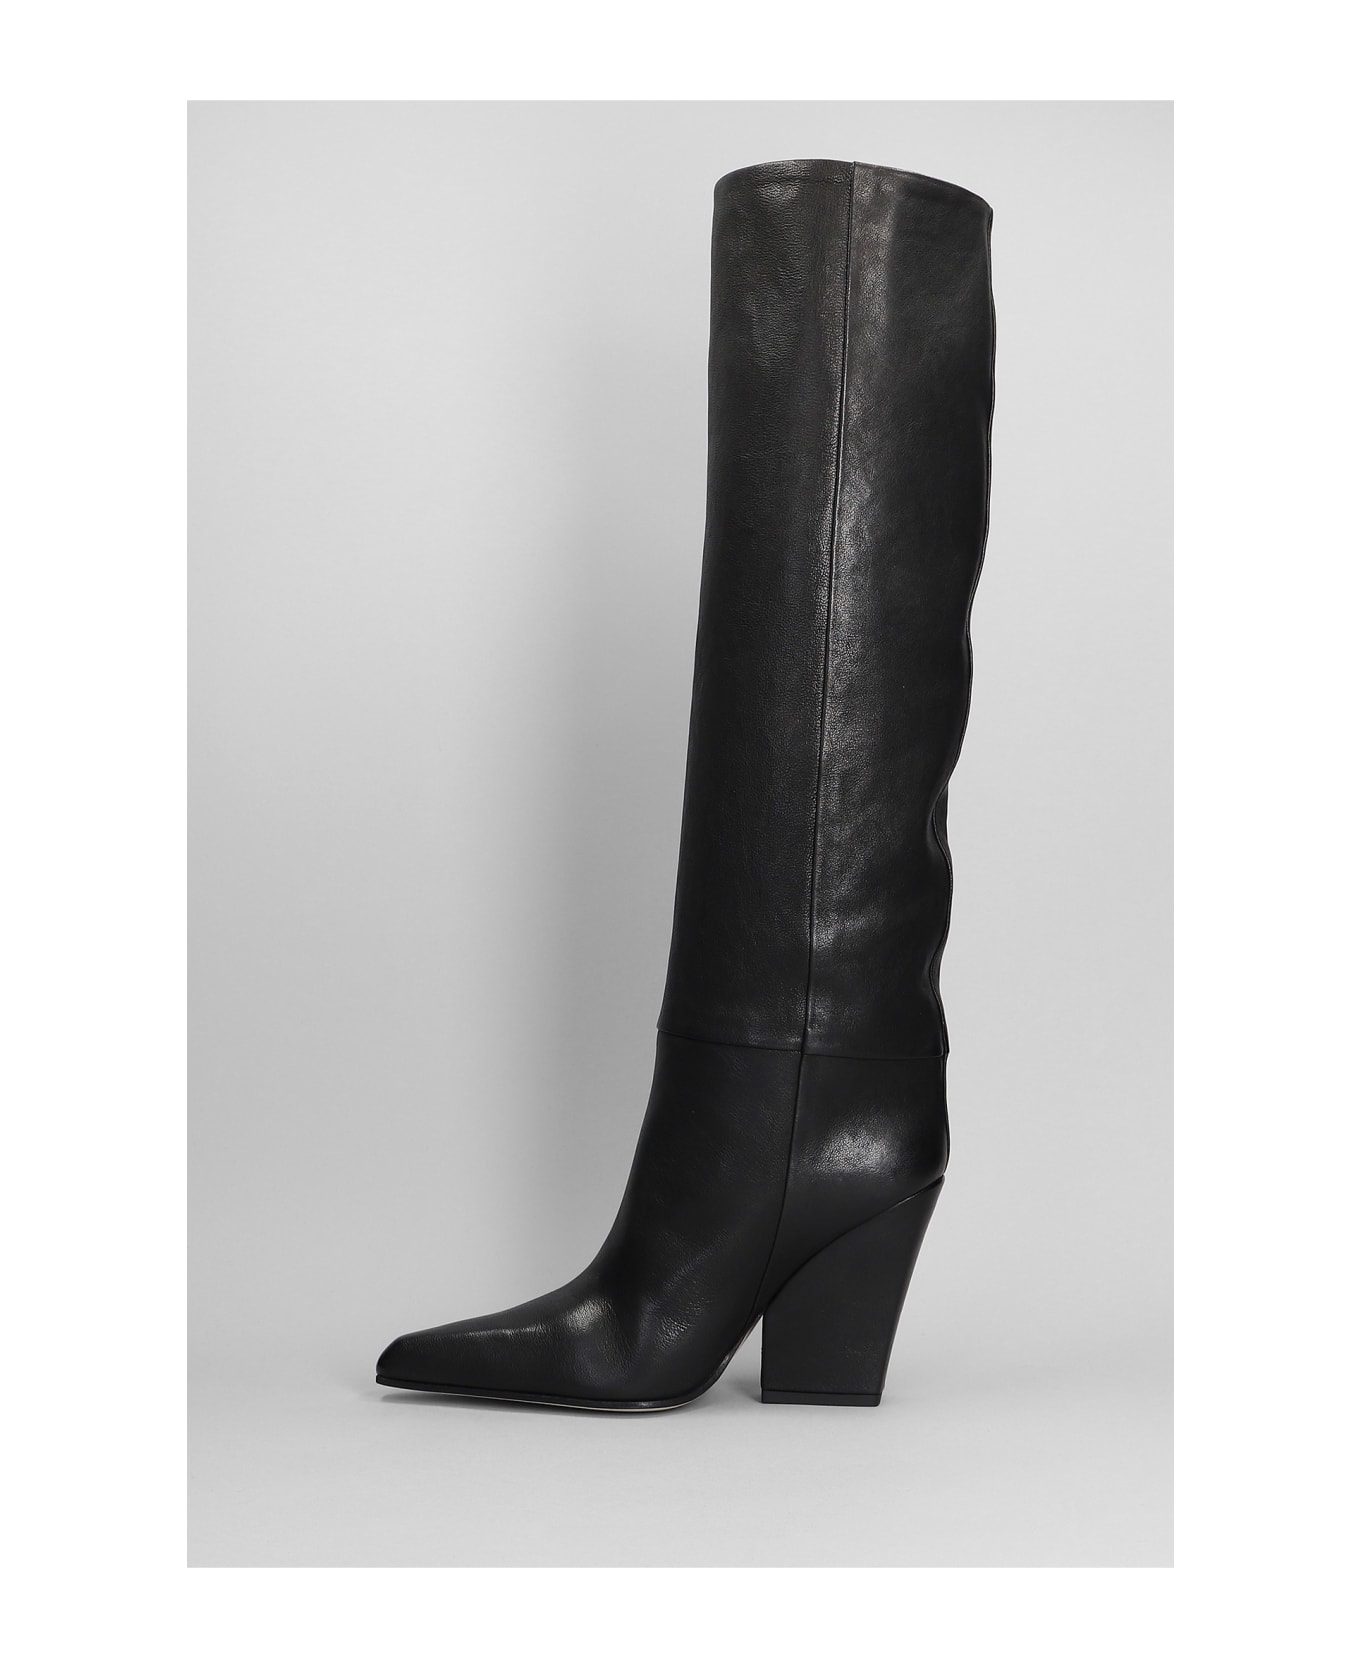 Paris Texas Jane High Heels Boots In Black Leather ブーツ